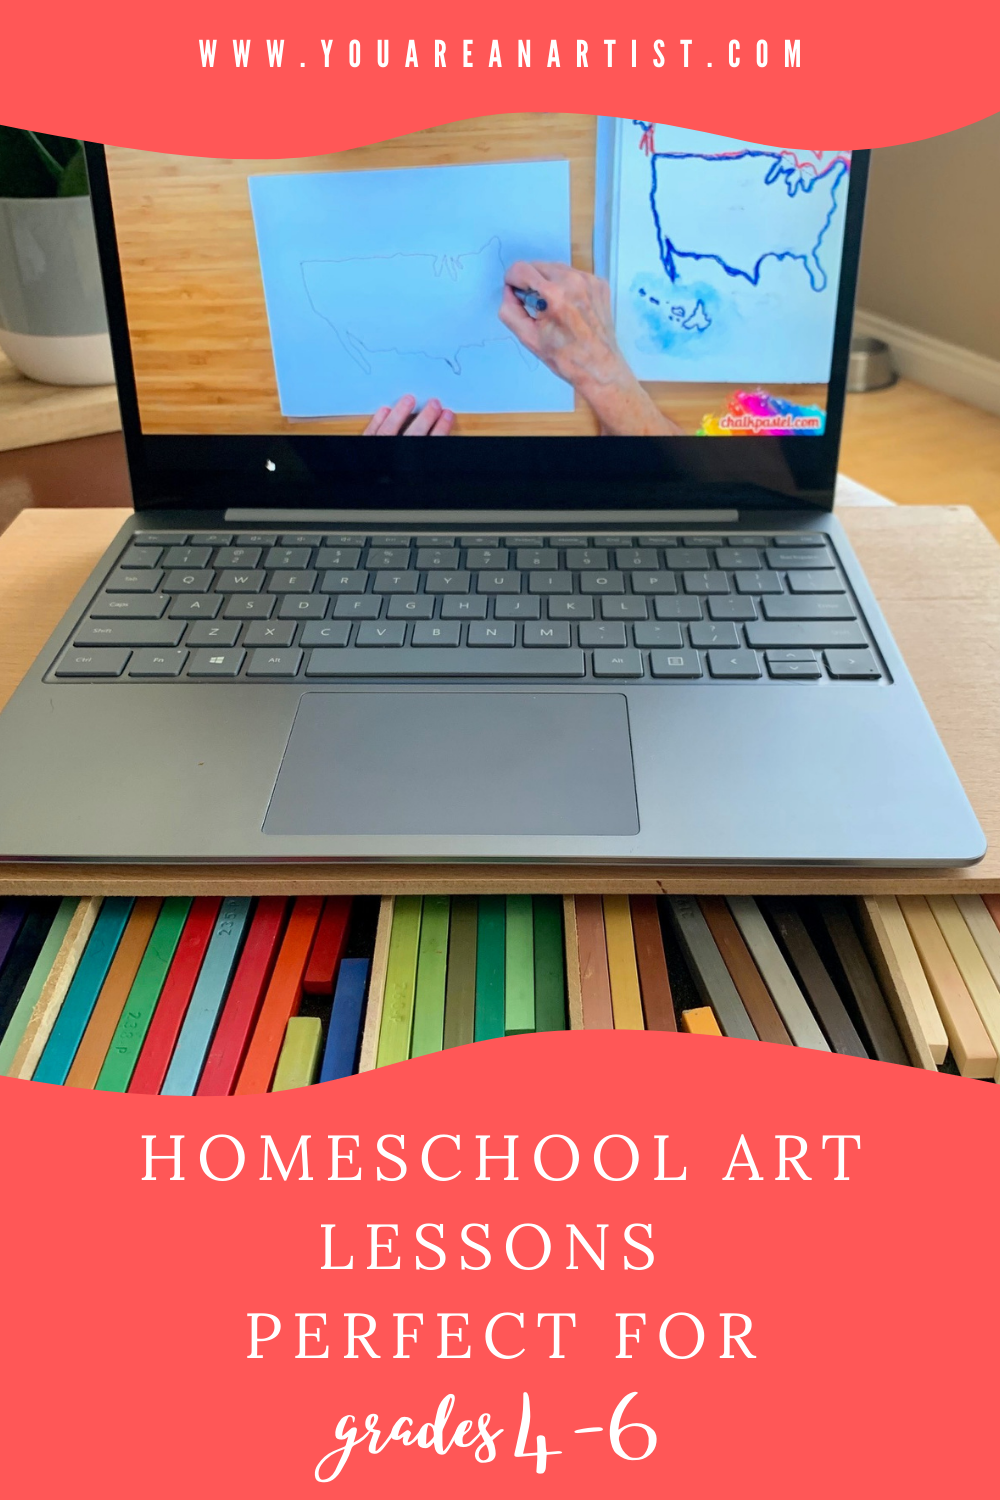 As our children get older, finding homeschool art lessons that are challenging and age appropriate can be difficult. Thankfully, we have found an assortment of unit studies and art lessons that are perfect for the late elementary grades 4-6.